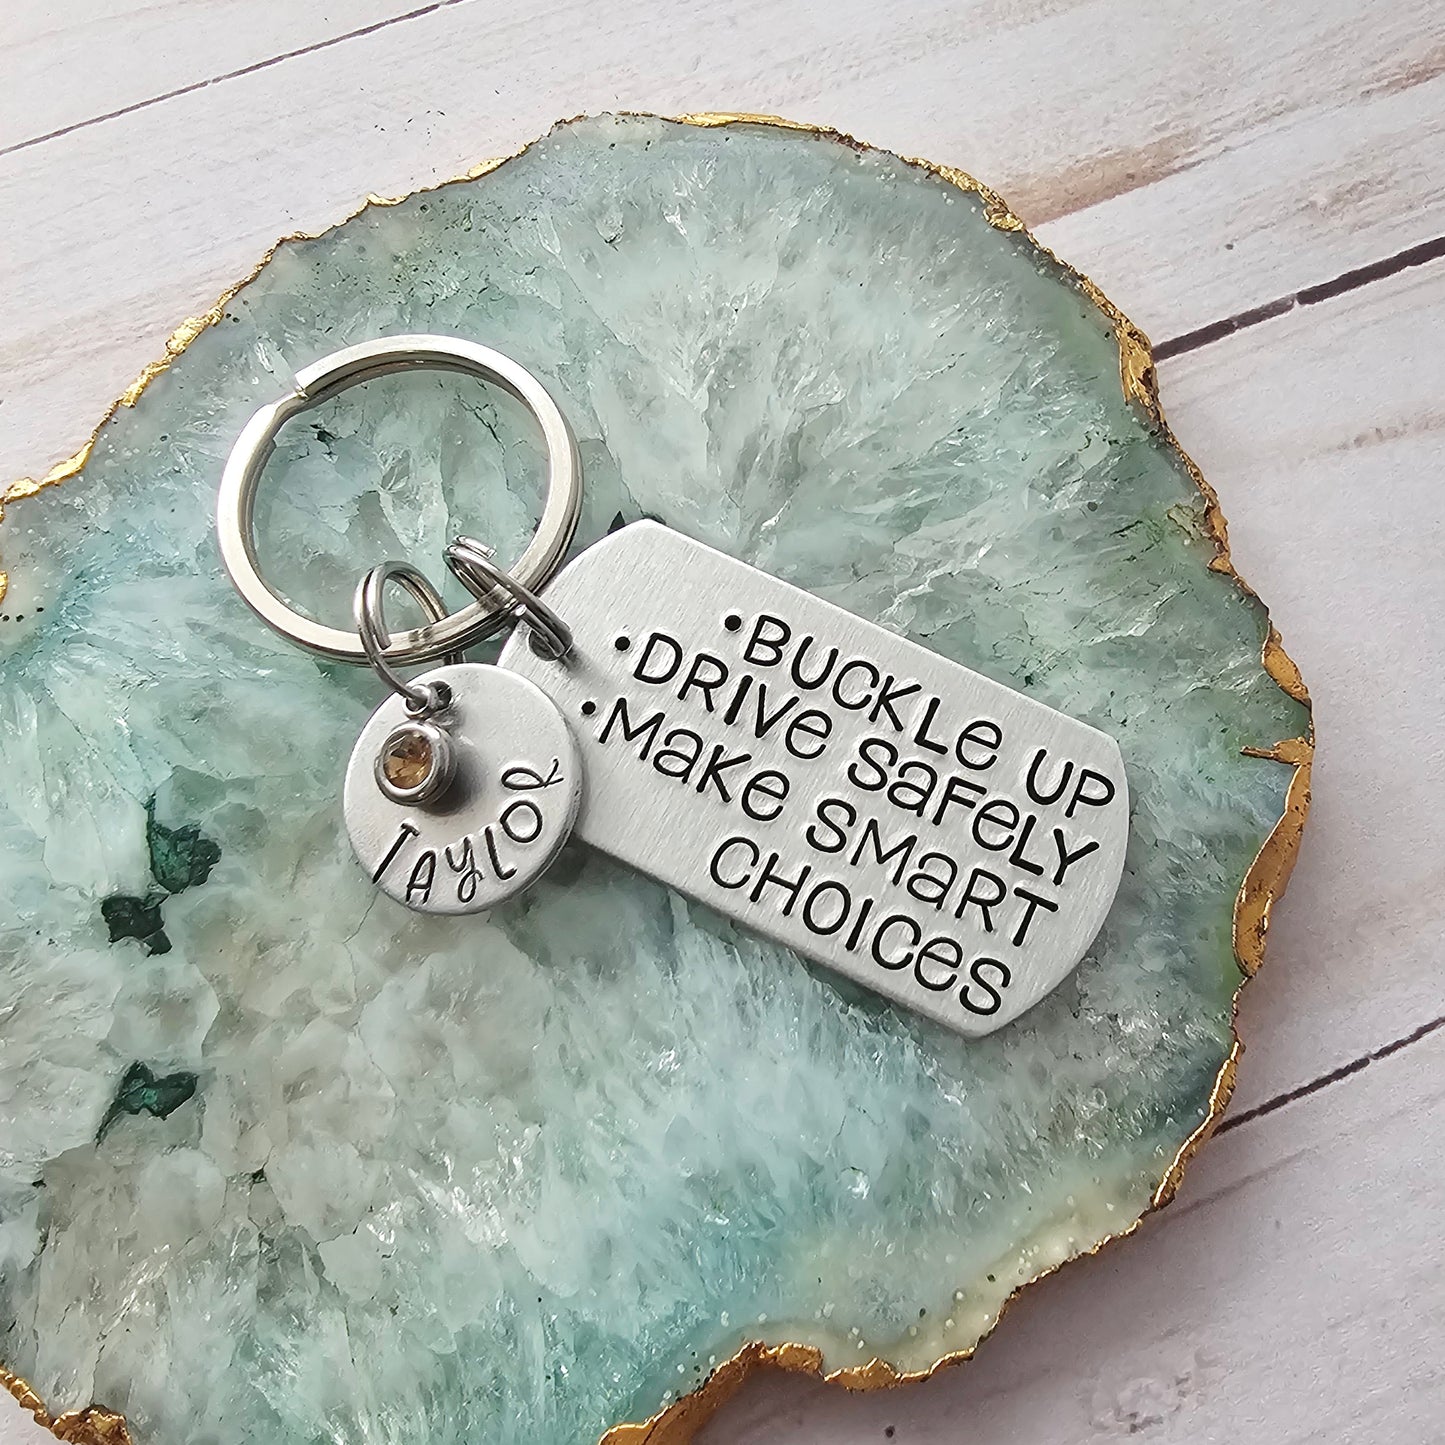 16th Birthday Gift for Daughter, Buckle Up Drive Safely Make Smart Choices, Handstamped Custom Keychain, Personalized Name and Birthstone